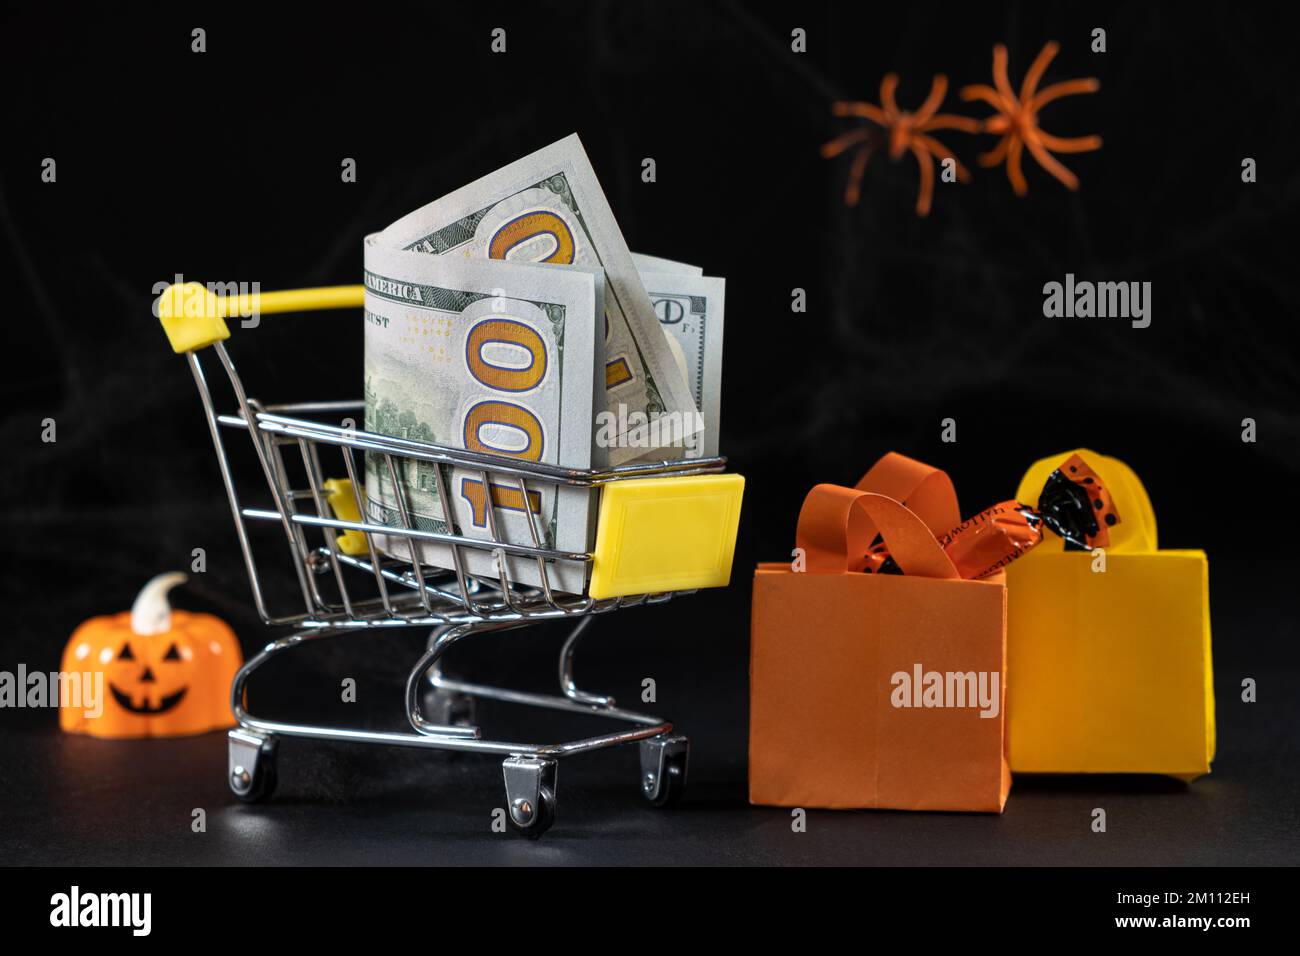 Cart with money hundred-dollar bills, paper bags for purchases. Halloween Sale Stock Photo